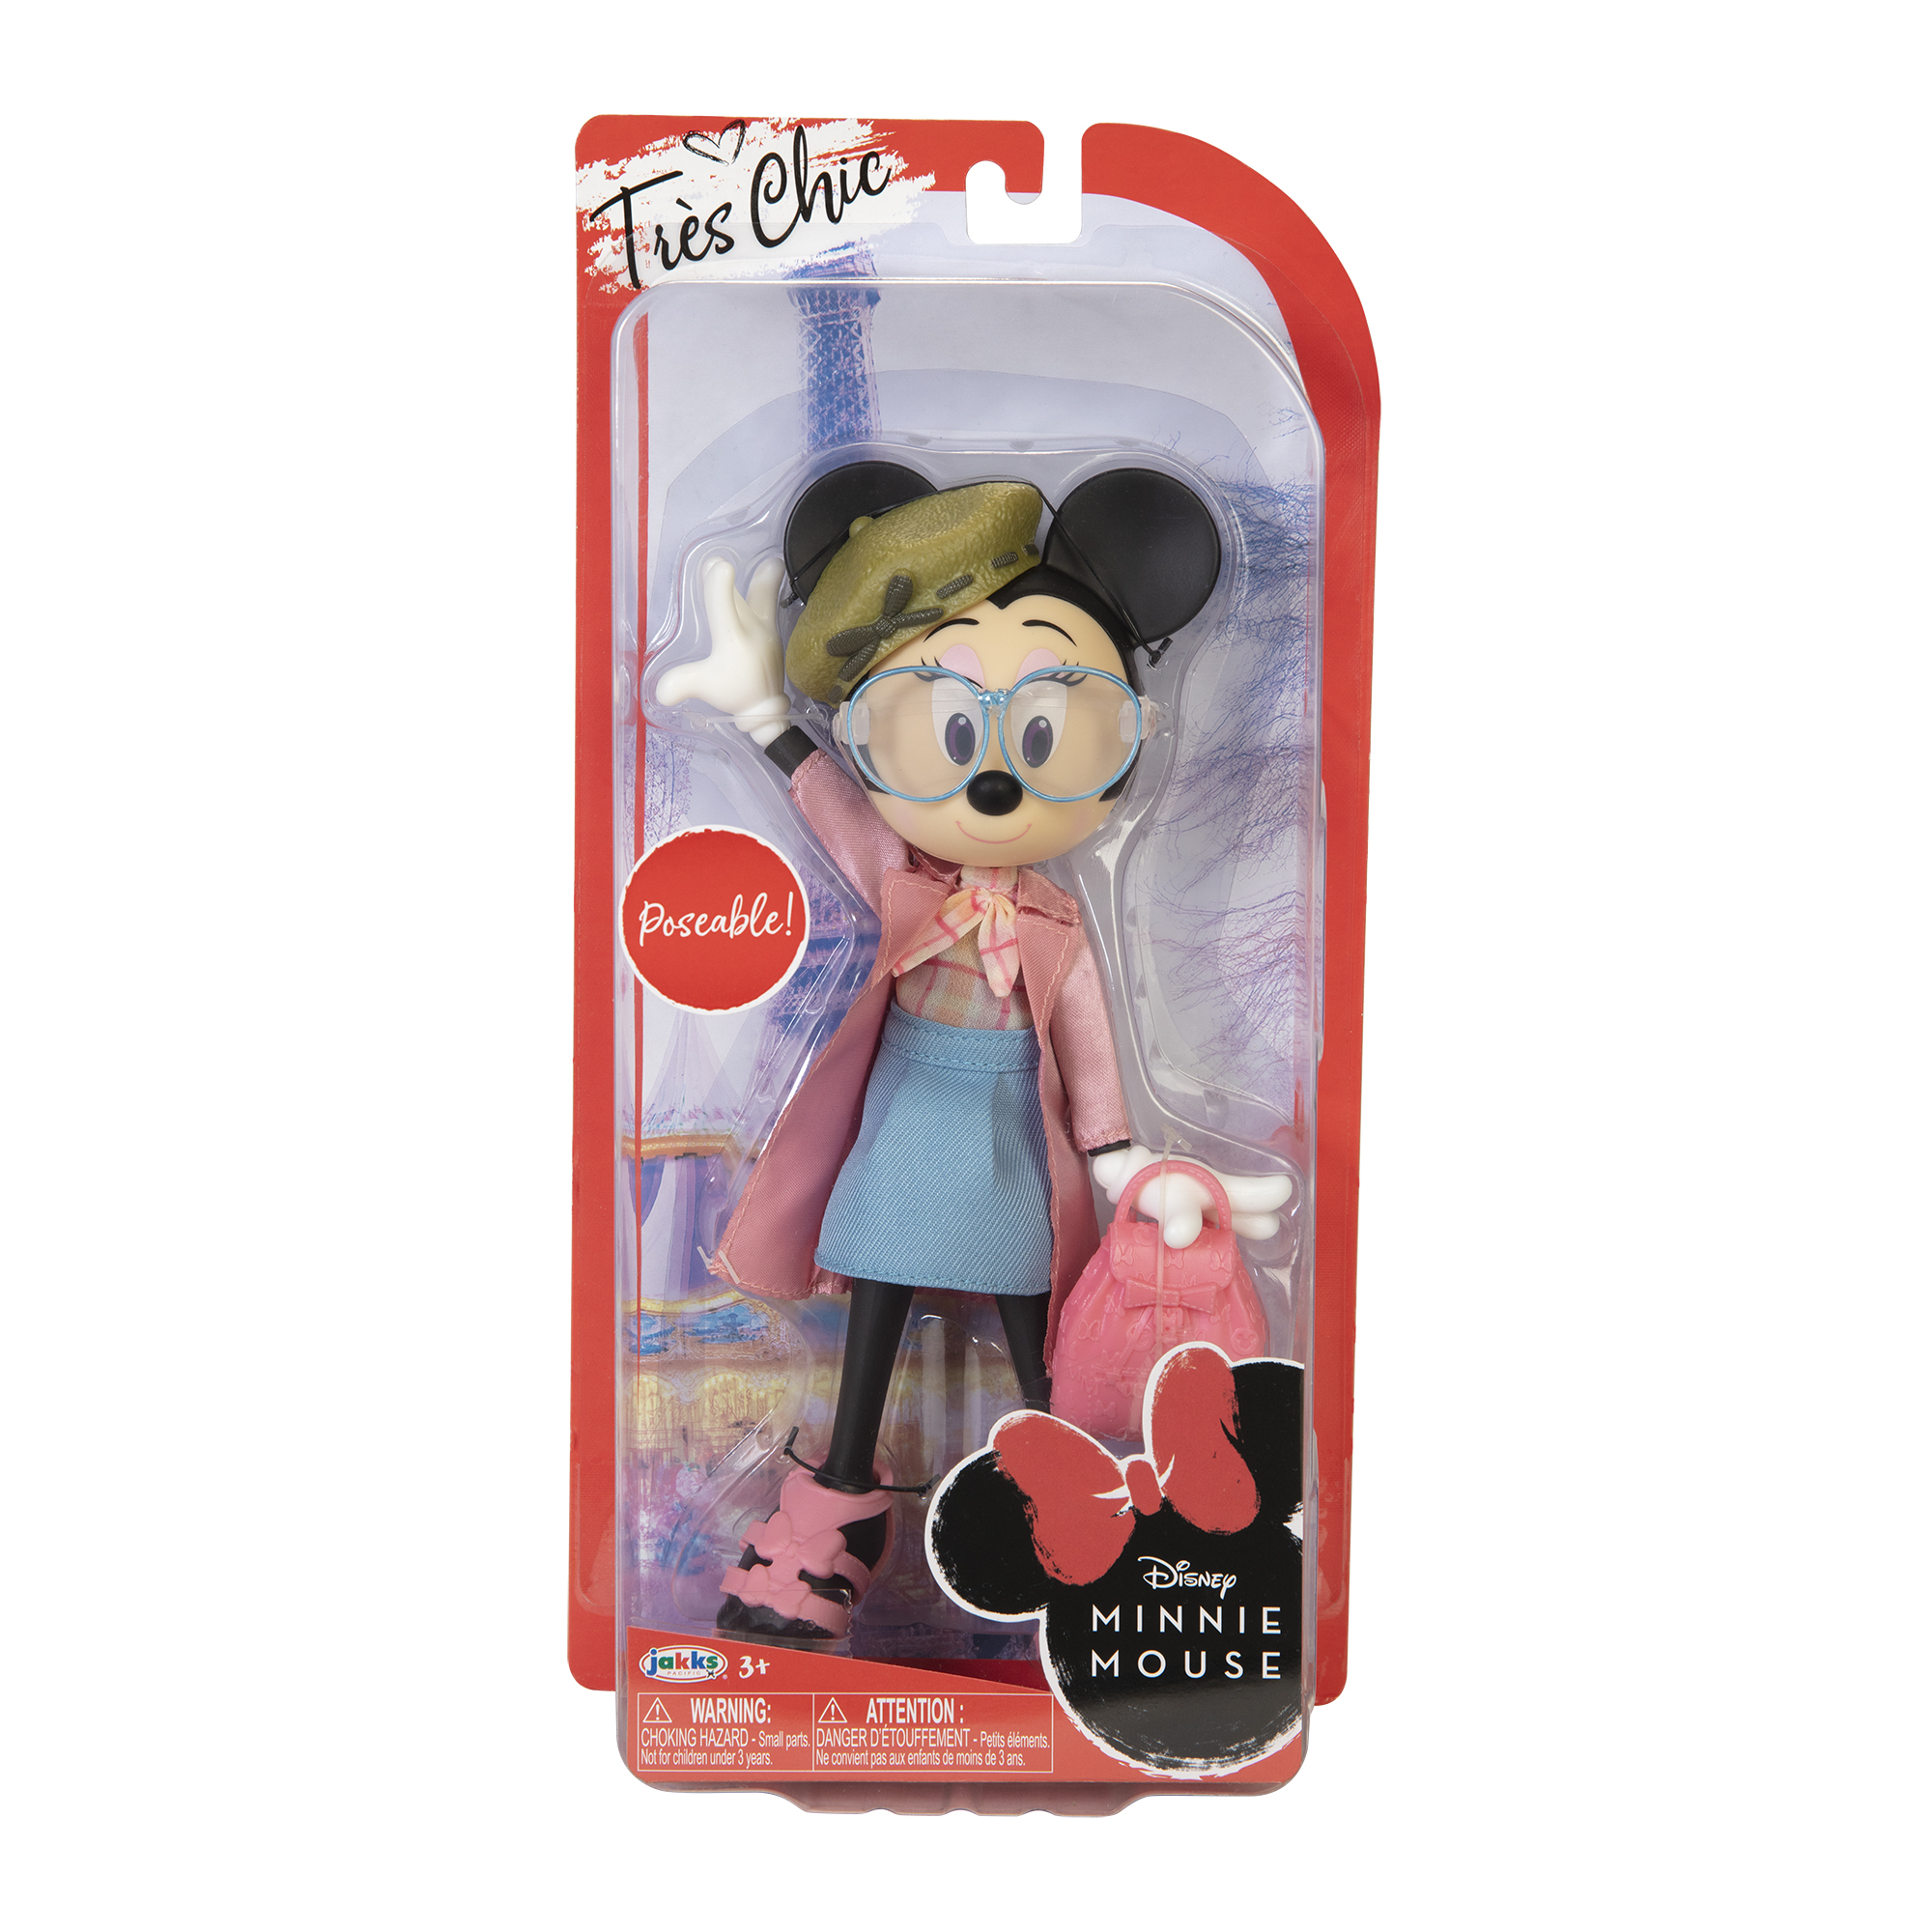 Minnie Mouse Très Chic Premium Fashion Doll, for Children Ages 3+ - image 1 of 6